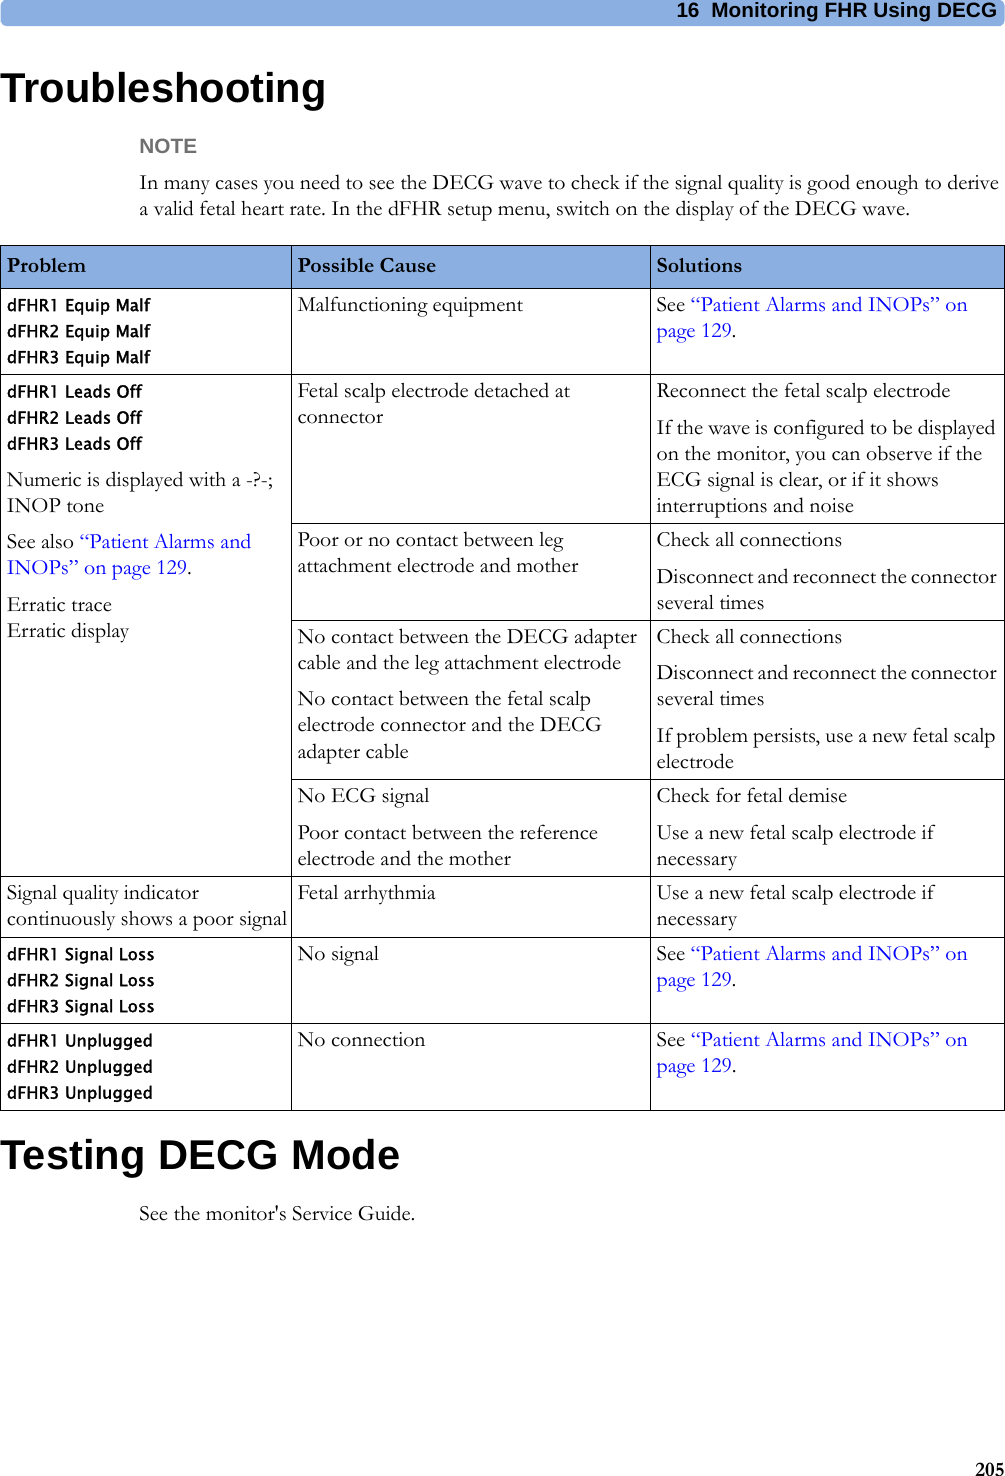 16  Monitoring FHR Using DECG205TroubleshootingNOTEIn many cases you need to see the DECG wave to check if the signal quality is good enough to derive a valid fetal heart rate. In the dFHR setup menu, switch on the display of the DECG wave.Testing DECG ModeSee the monitor&apos;s Service Guide.Problem Possible Cause SolutionsdFHR1 Equip Malf dFHR2 Equip Malf dFHR3 Equip MalfMalfunctioning equipment See “Patient Alarms and INOPs” on page 129.dFHR1 Leads Off dFHR2 Leads Off dFHR3 Leads OffNumeric is displayed with a -?-; INOP toneSee also “Patient Alarms and INOPs” on page 129.Erratic trace Erratic displayFetal scalp electrode detached at connectorReconnect the fetal scalp electrodeIf the wave is configured to be displayed on the monitor, you can observe if the ECG signal is clear, or if it shows interruptions and noisePoor or no contact between leg attachment electrode and motherCheck all connectionsDisconnect and reconnect the connector several timesNo contact between the DECG adapter cable and the leg attachment electrodeNo contact between the fetal scalp electrode connector and the DECG adapter cableCheck all connectionsDisconnect and reconnect the connector several timesIf problem persists, use a new fetal scalp electrodeNo ECG signalPoor contact between the reference electrode and the motherCheck for fetal demiseUse a new fetal scalp electrode if necessarySignal quality indicator continuously shows a poor signalFetal arrhythmia Use a new fetal scalp electrode if necessarydFHR1 Signal Loss dFHR2 Signal Loss dFHR3 Signal LossNo signal See “Patient Alarms and INOPs” on page 129.dFHR1 Unplugged dFHR2 Unplugged dFHR3 UnpluggedNo connection See “Patient Alarms and INOPs” on page 129.